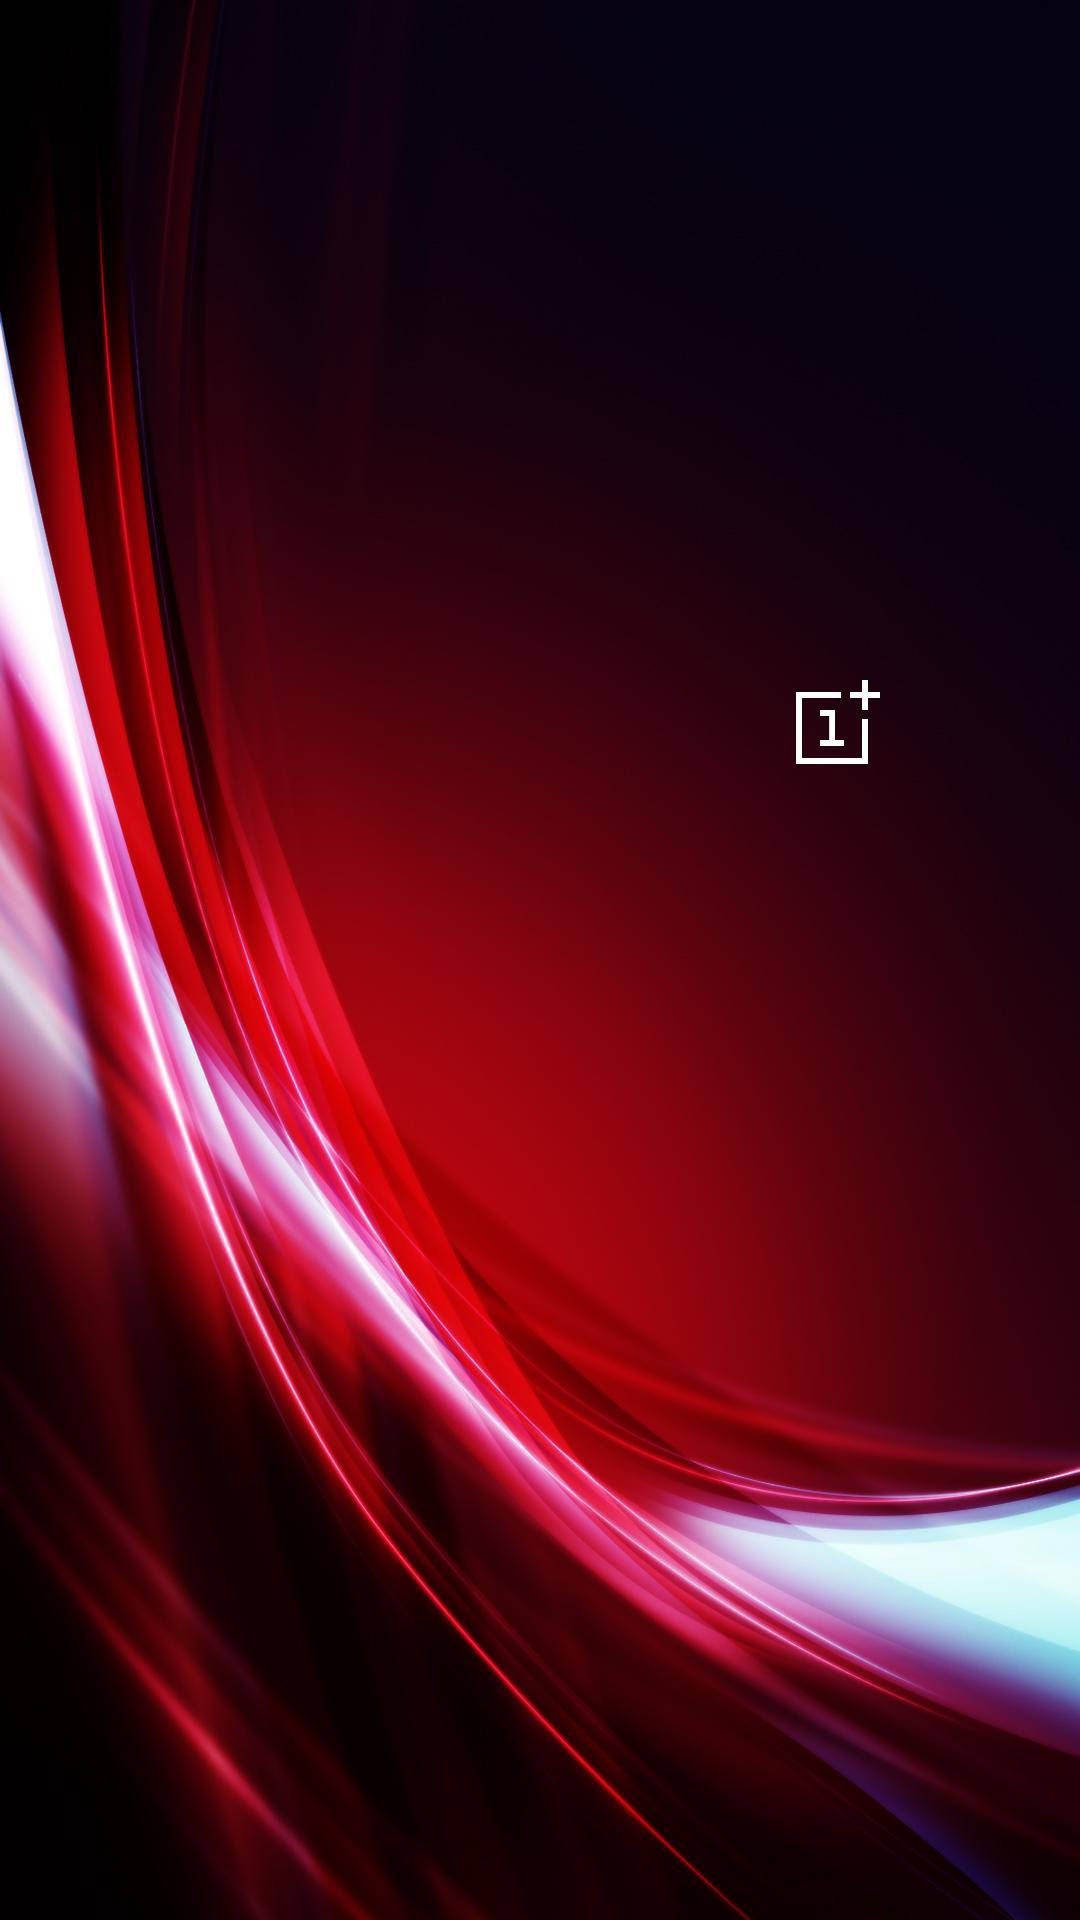 Exquisite OnePlus Red Gradient. Oneplus Gradient in its authentic Scarlet Red. Wallpaper